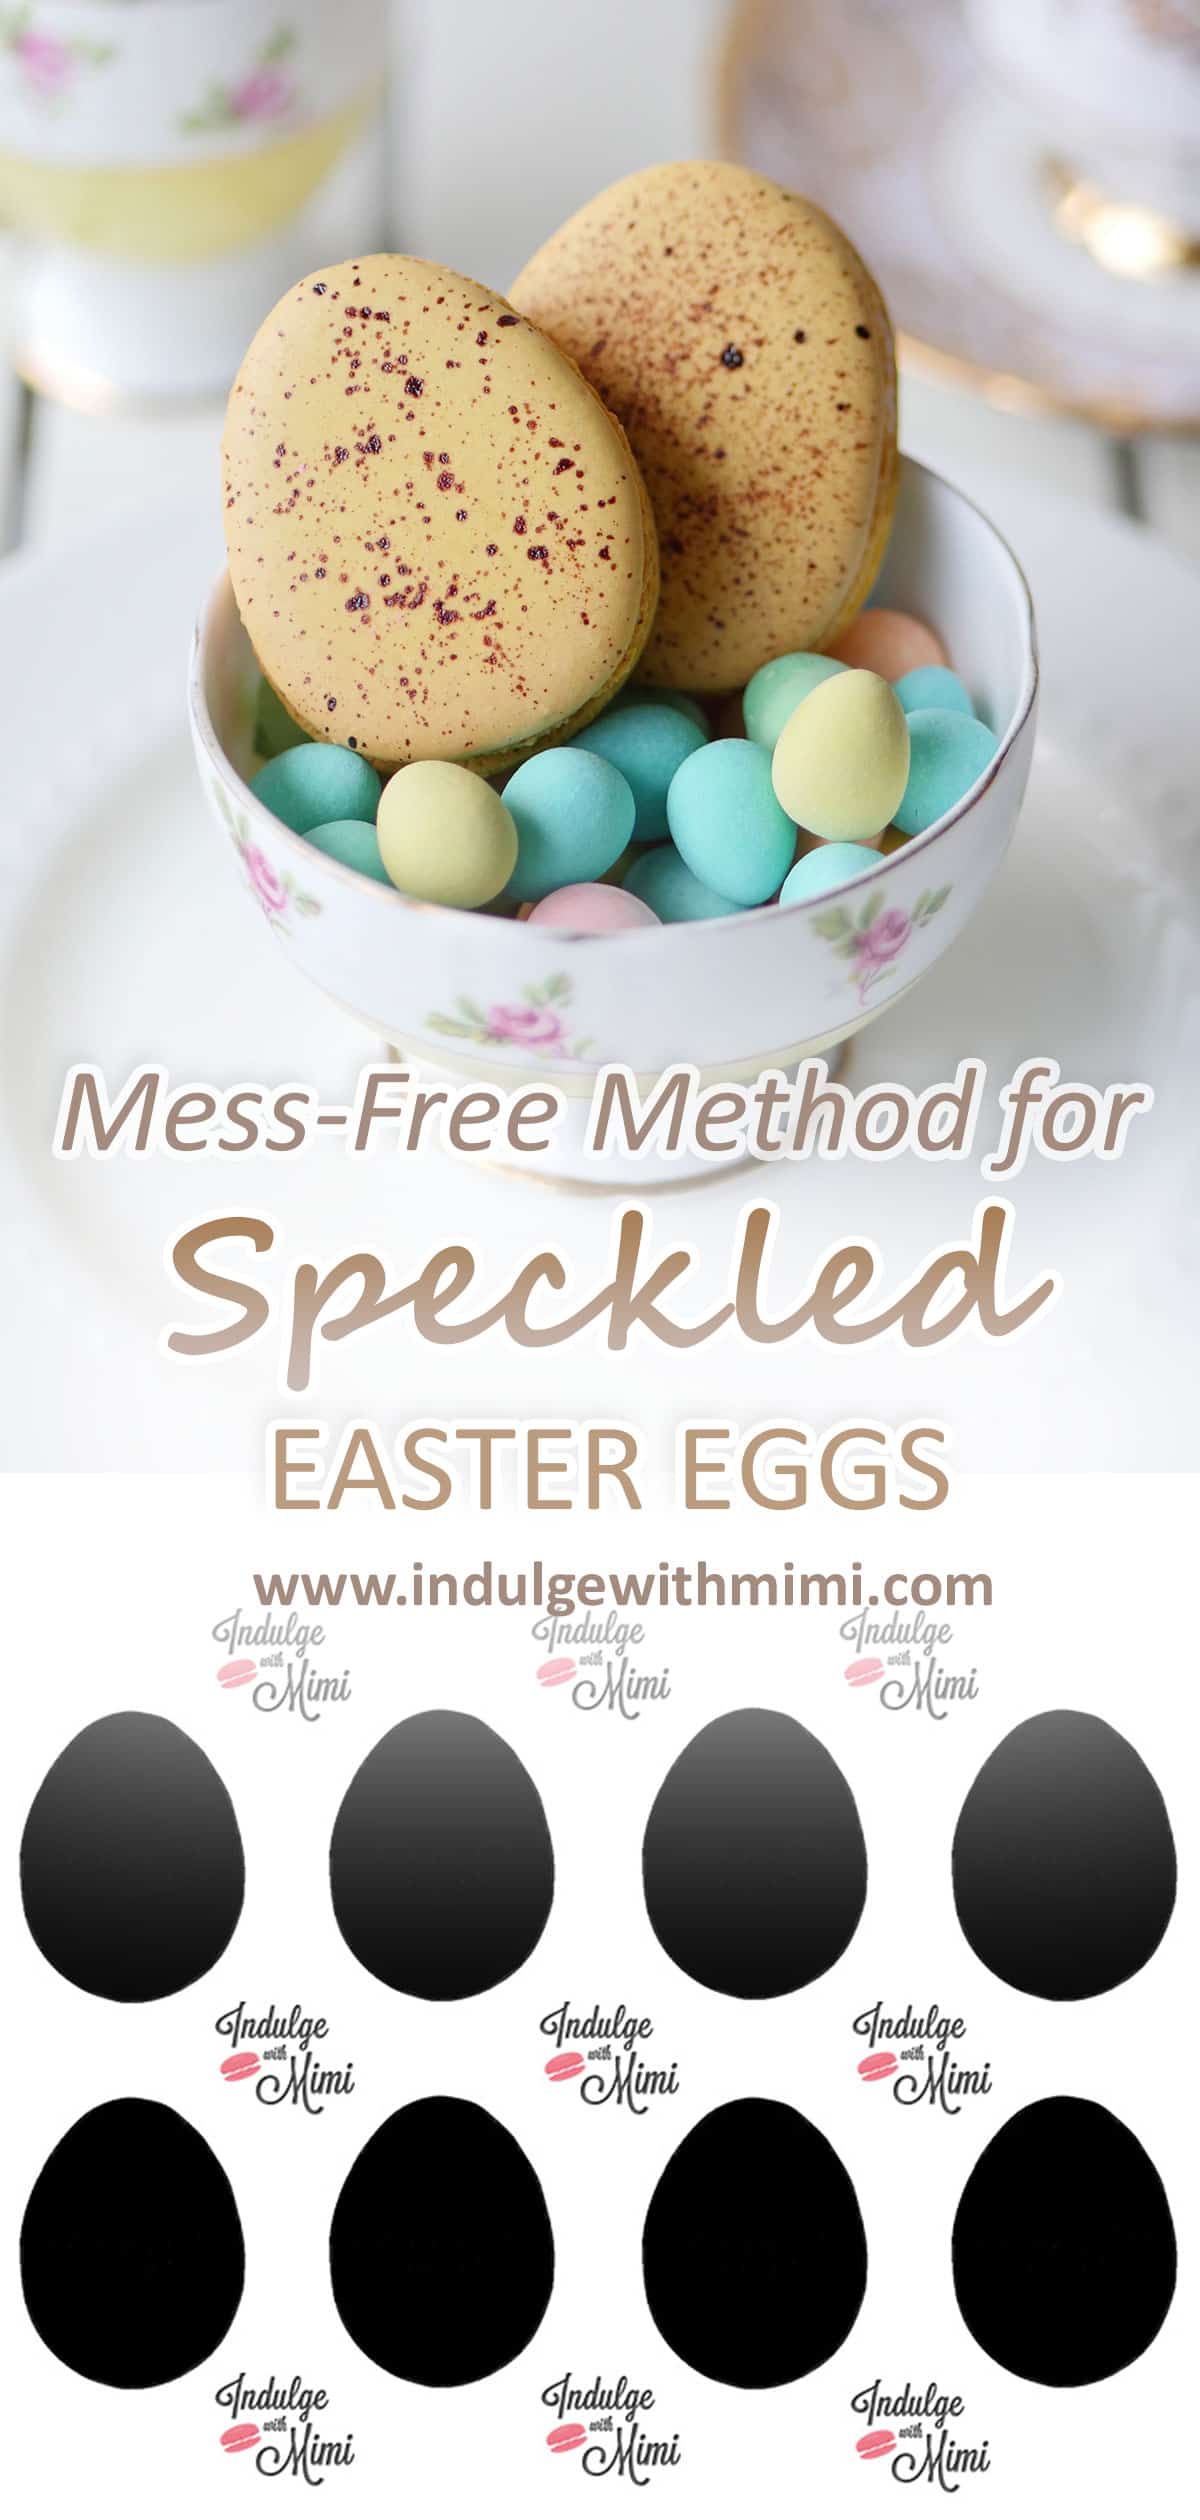 Beautiful Speckled Easter Eggs in a little dish filled with mini pastel coloured eggs.